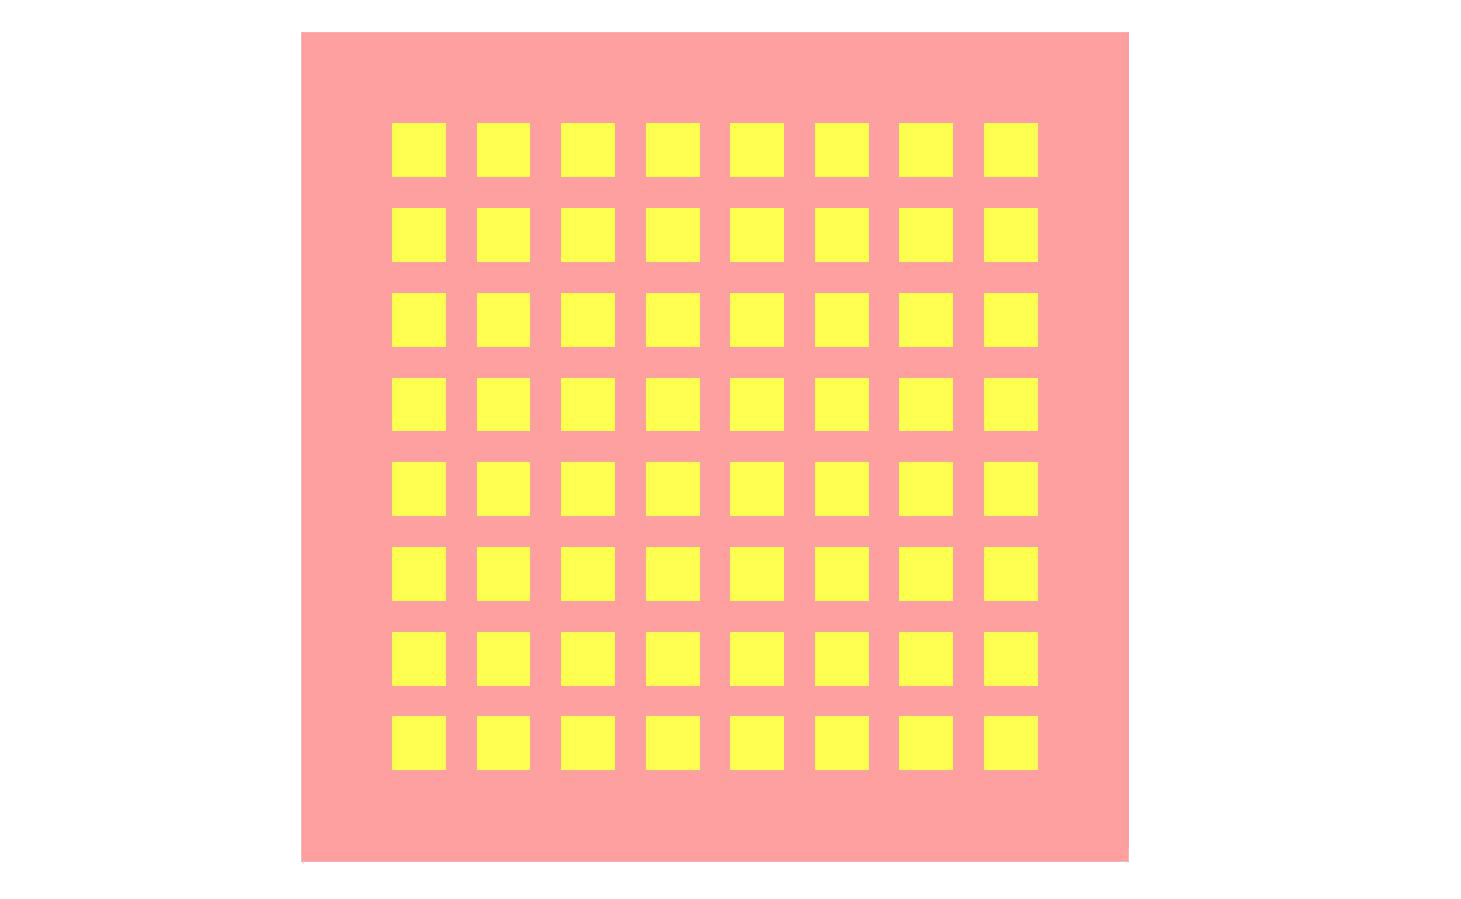 Figure 1: A top view of the antenna geometry showing the layout of the 8x8 array of patches.